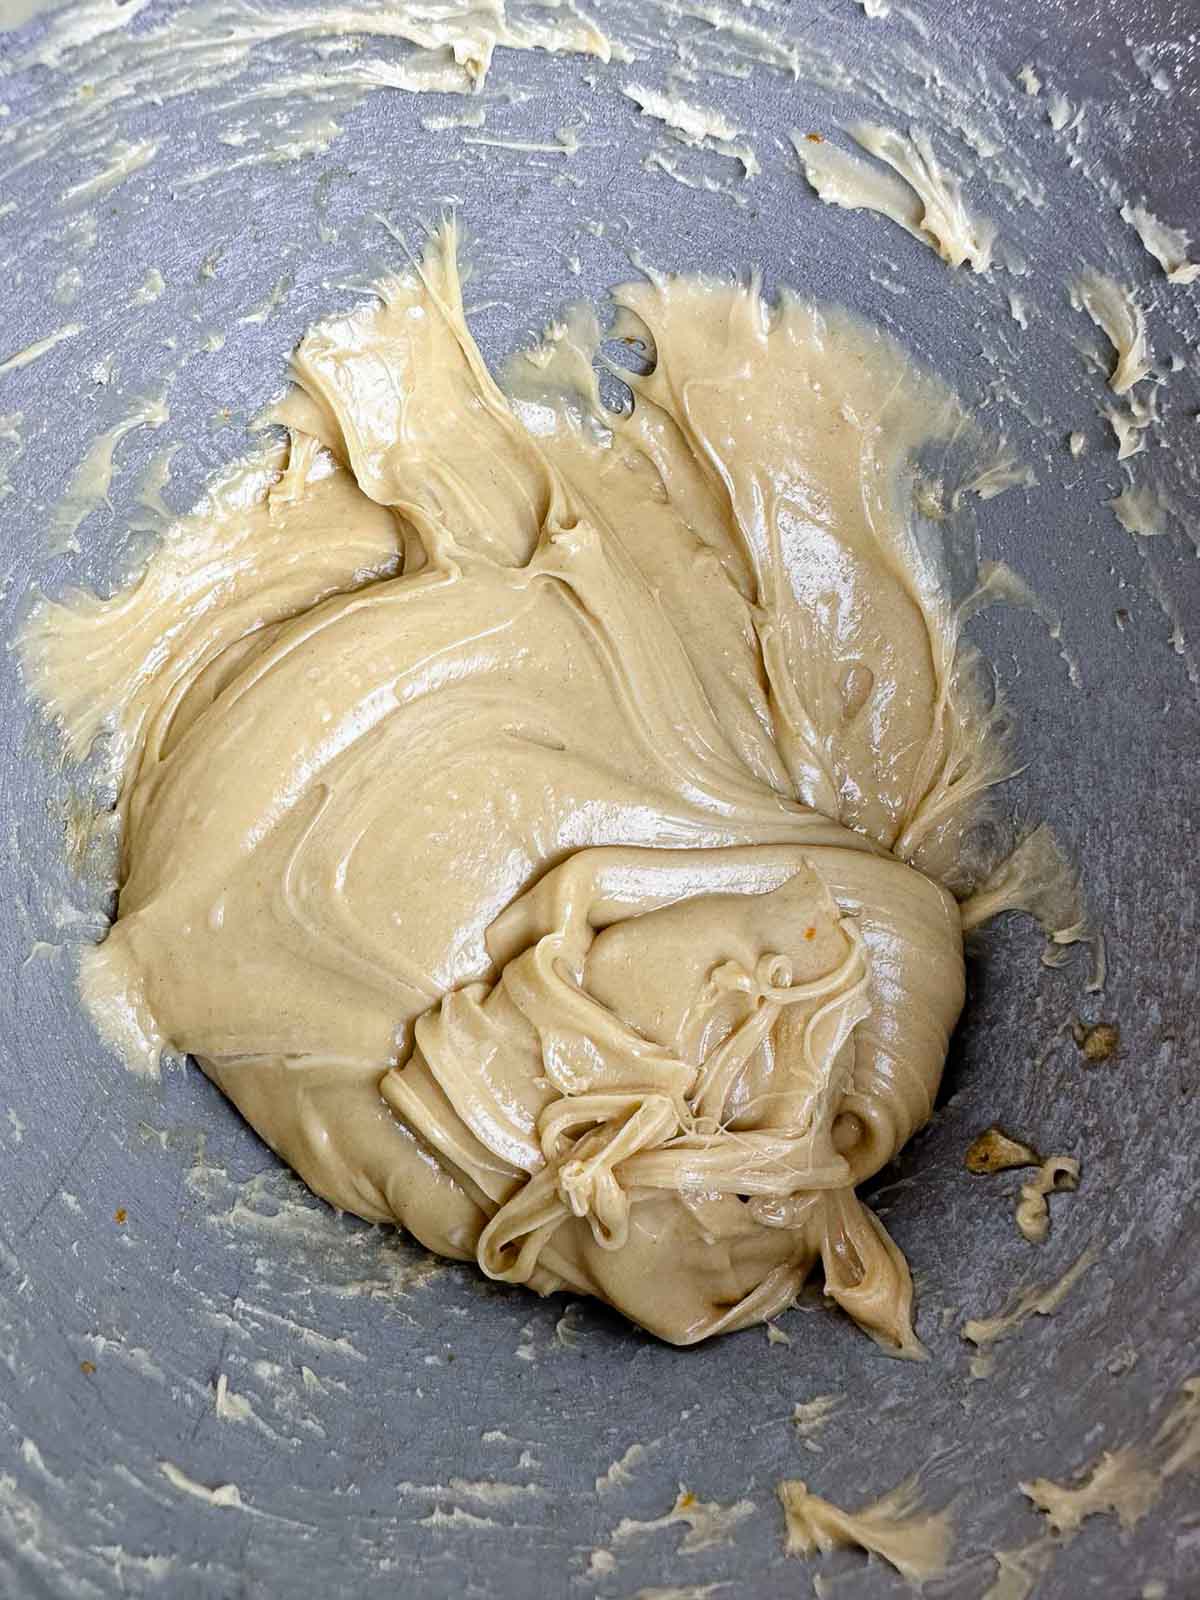 The Italian Easter bread dough after beating in the butter